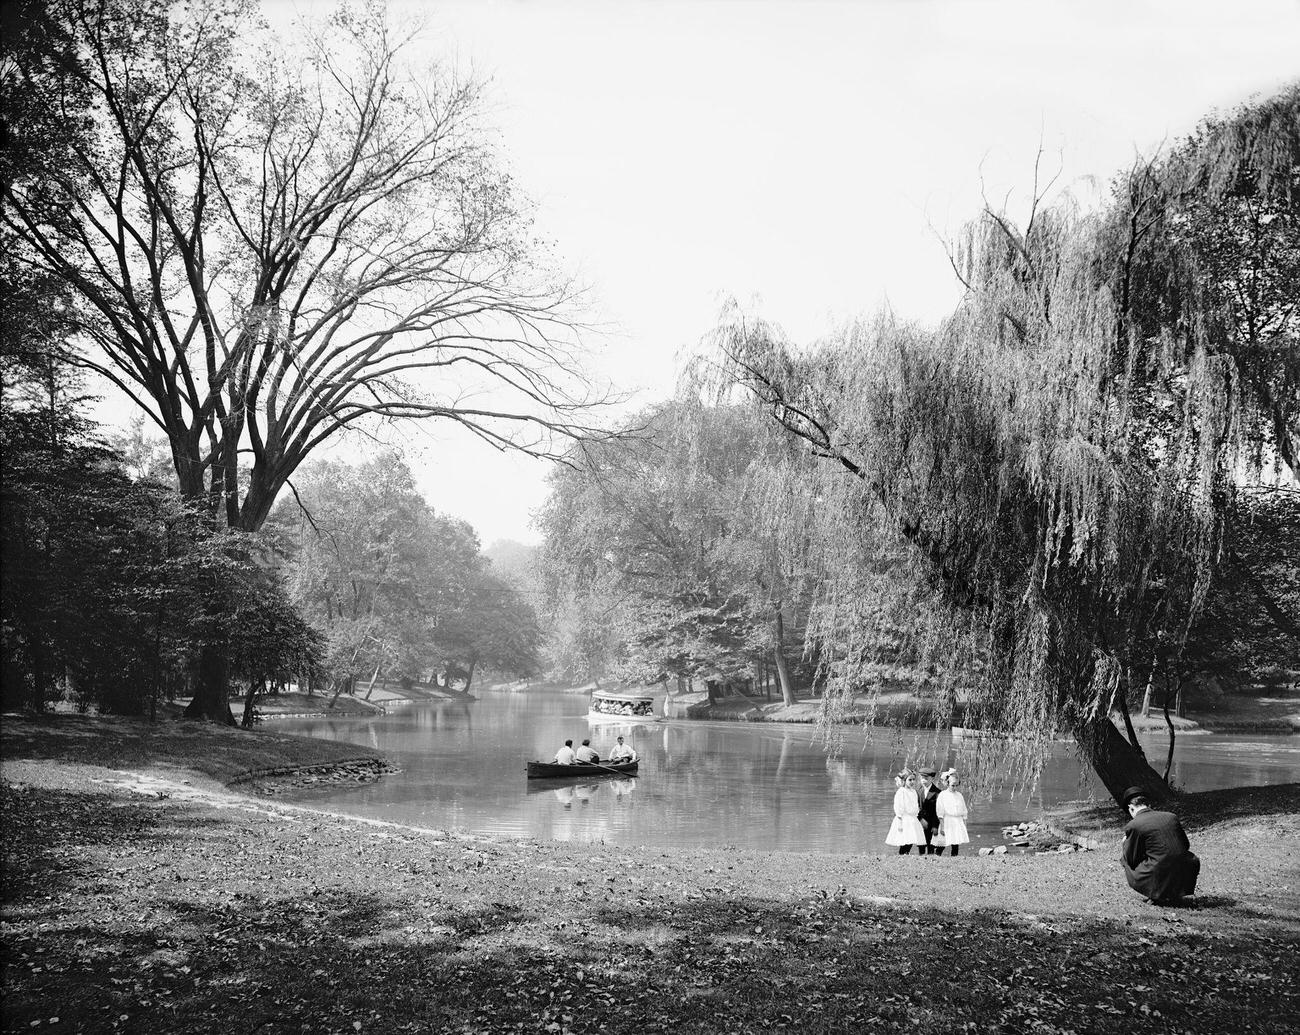 Boaters On Lake In Prospect Park, Brooklyn, 1910